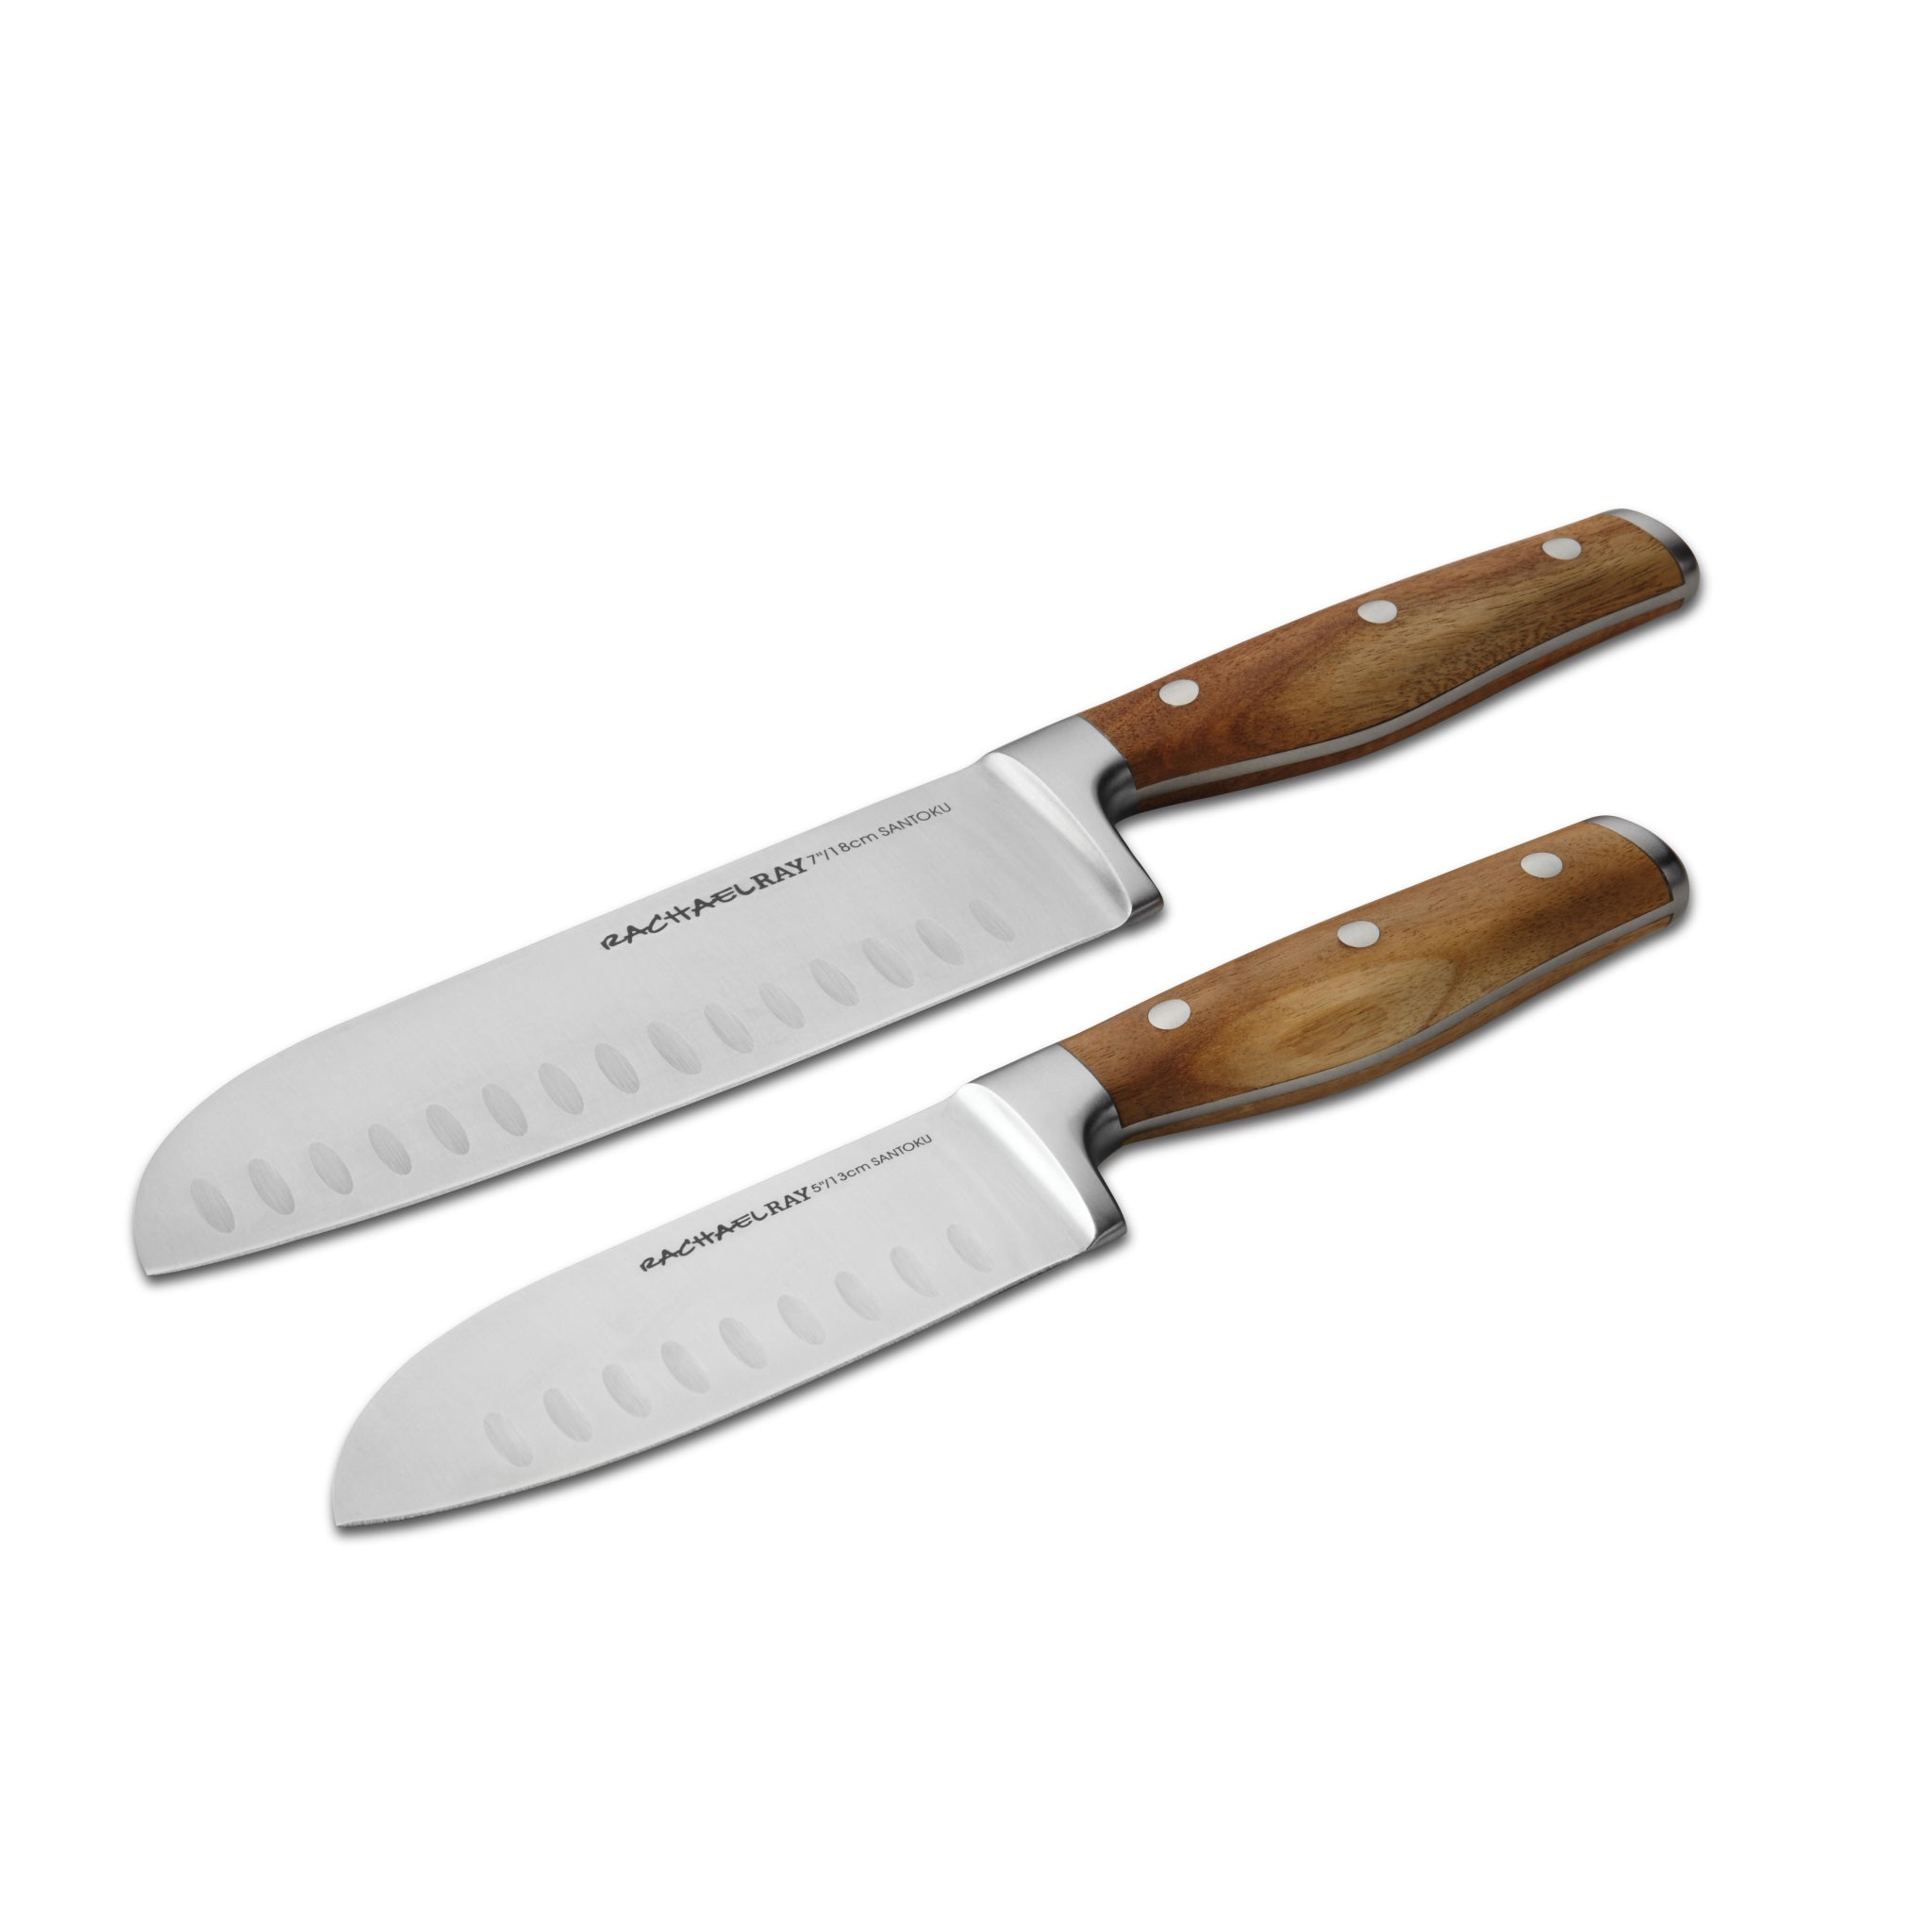 Zyliss 2 Piece Santoku Knife Set With Sheath Covers, Stainless Steel :  Target